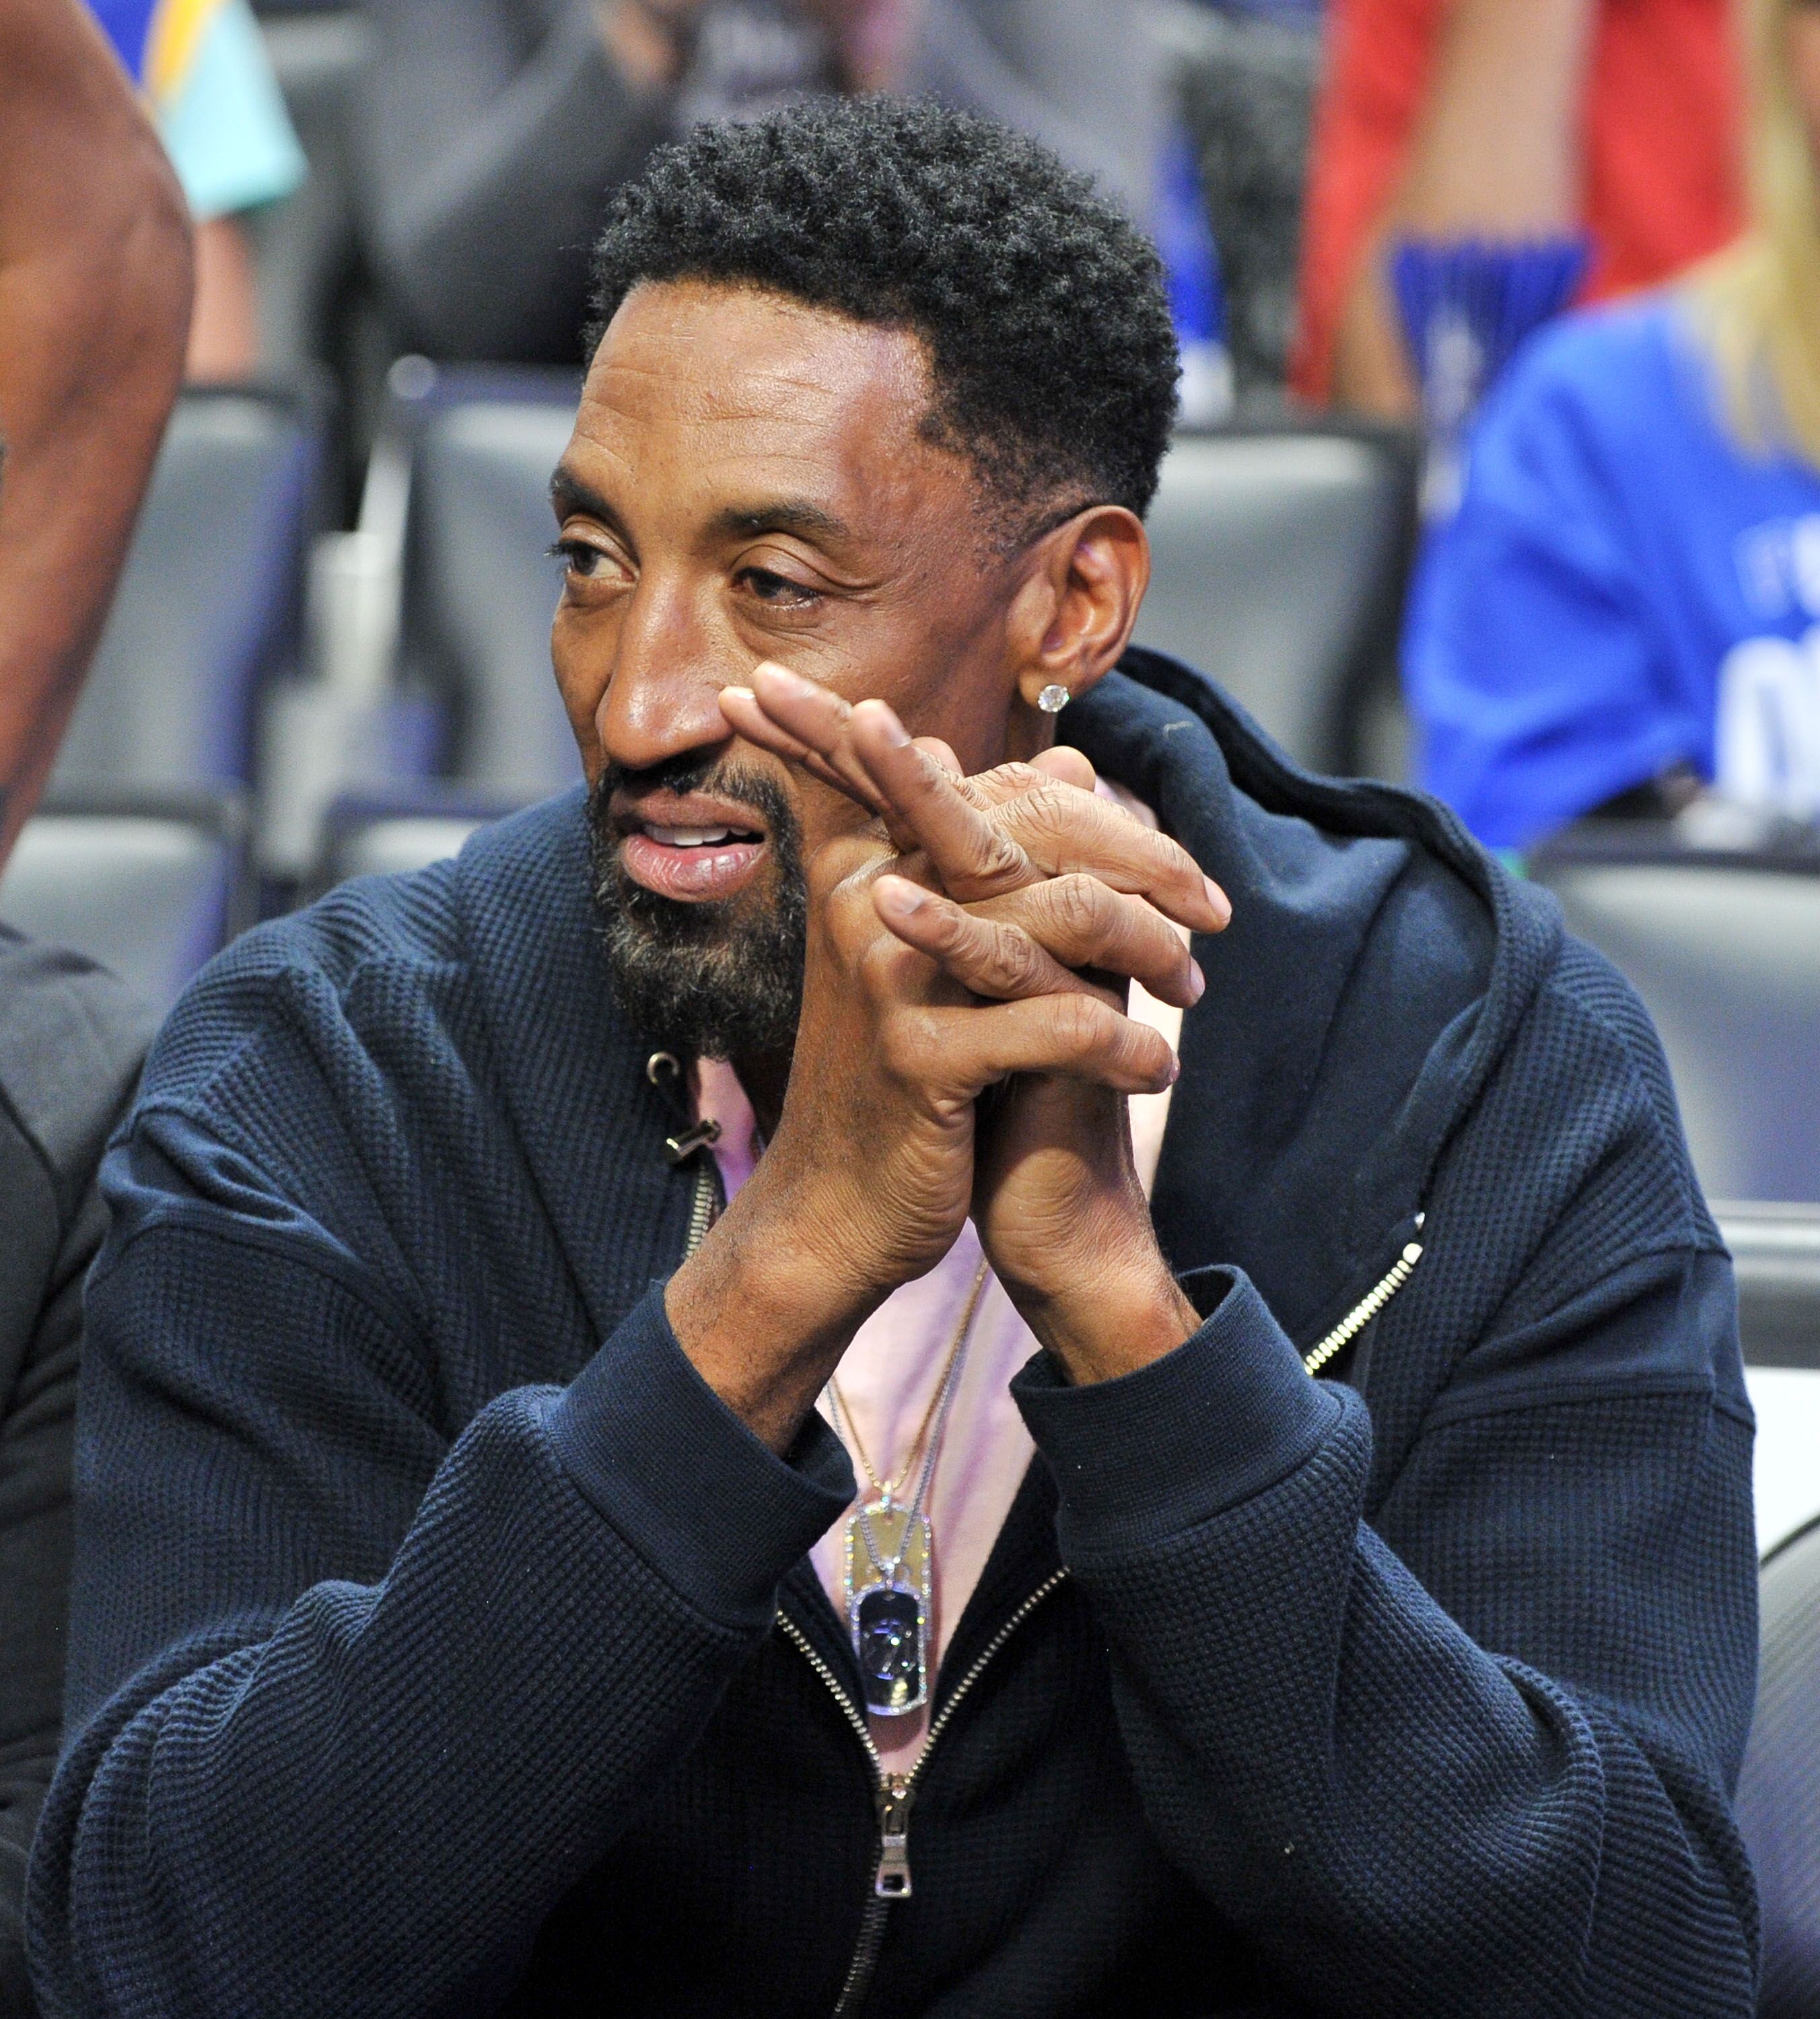  Scottie Pippen at the NBA playoffs between the Los Angeles Clippers and the Golden State Warriors in 2019 in Los Angeles | Source: Getty Images